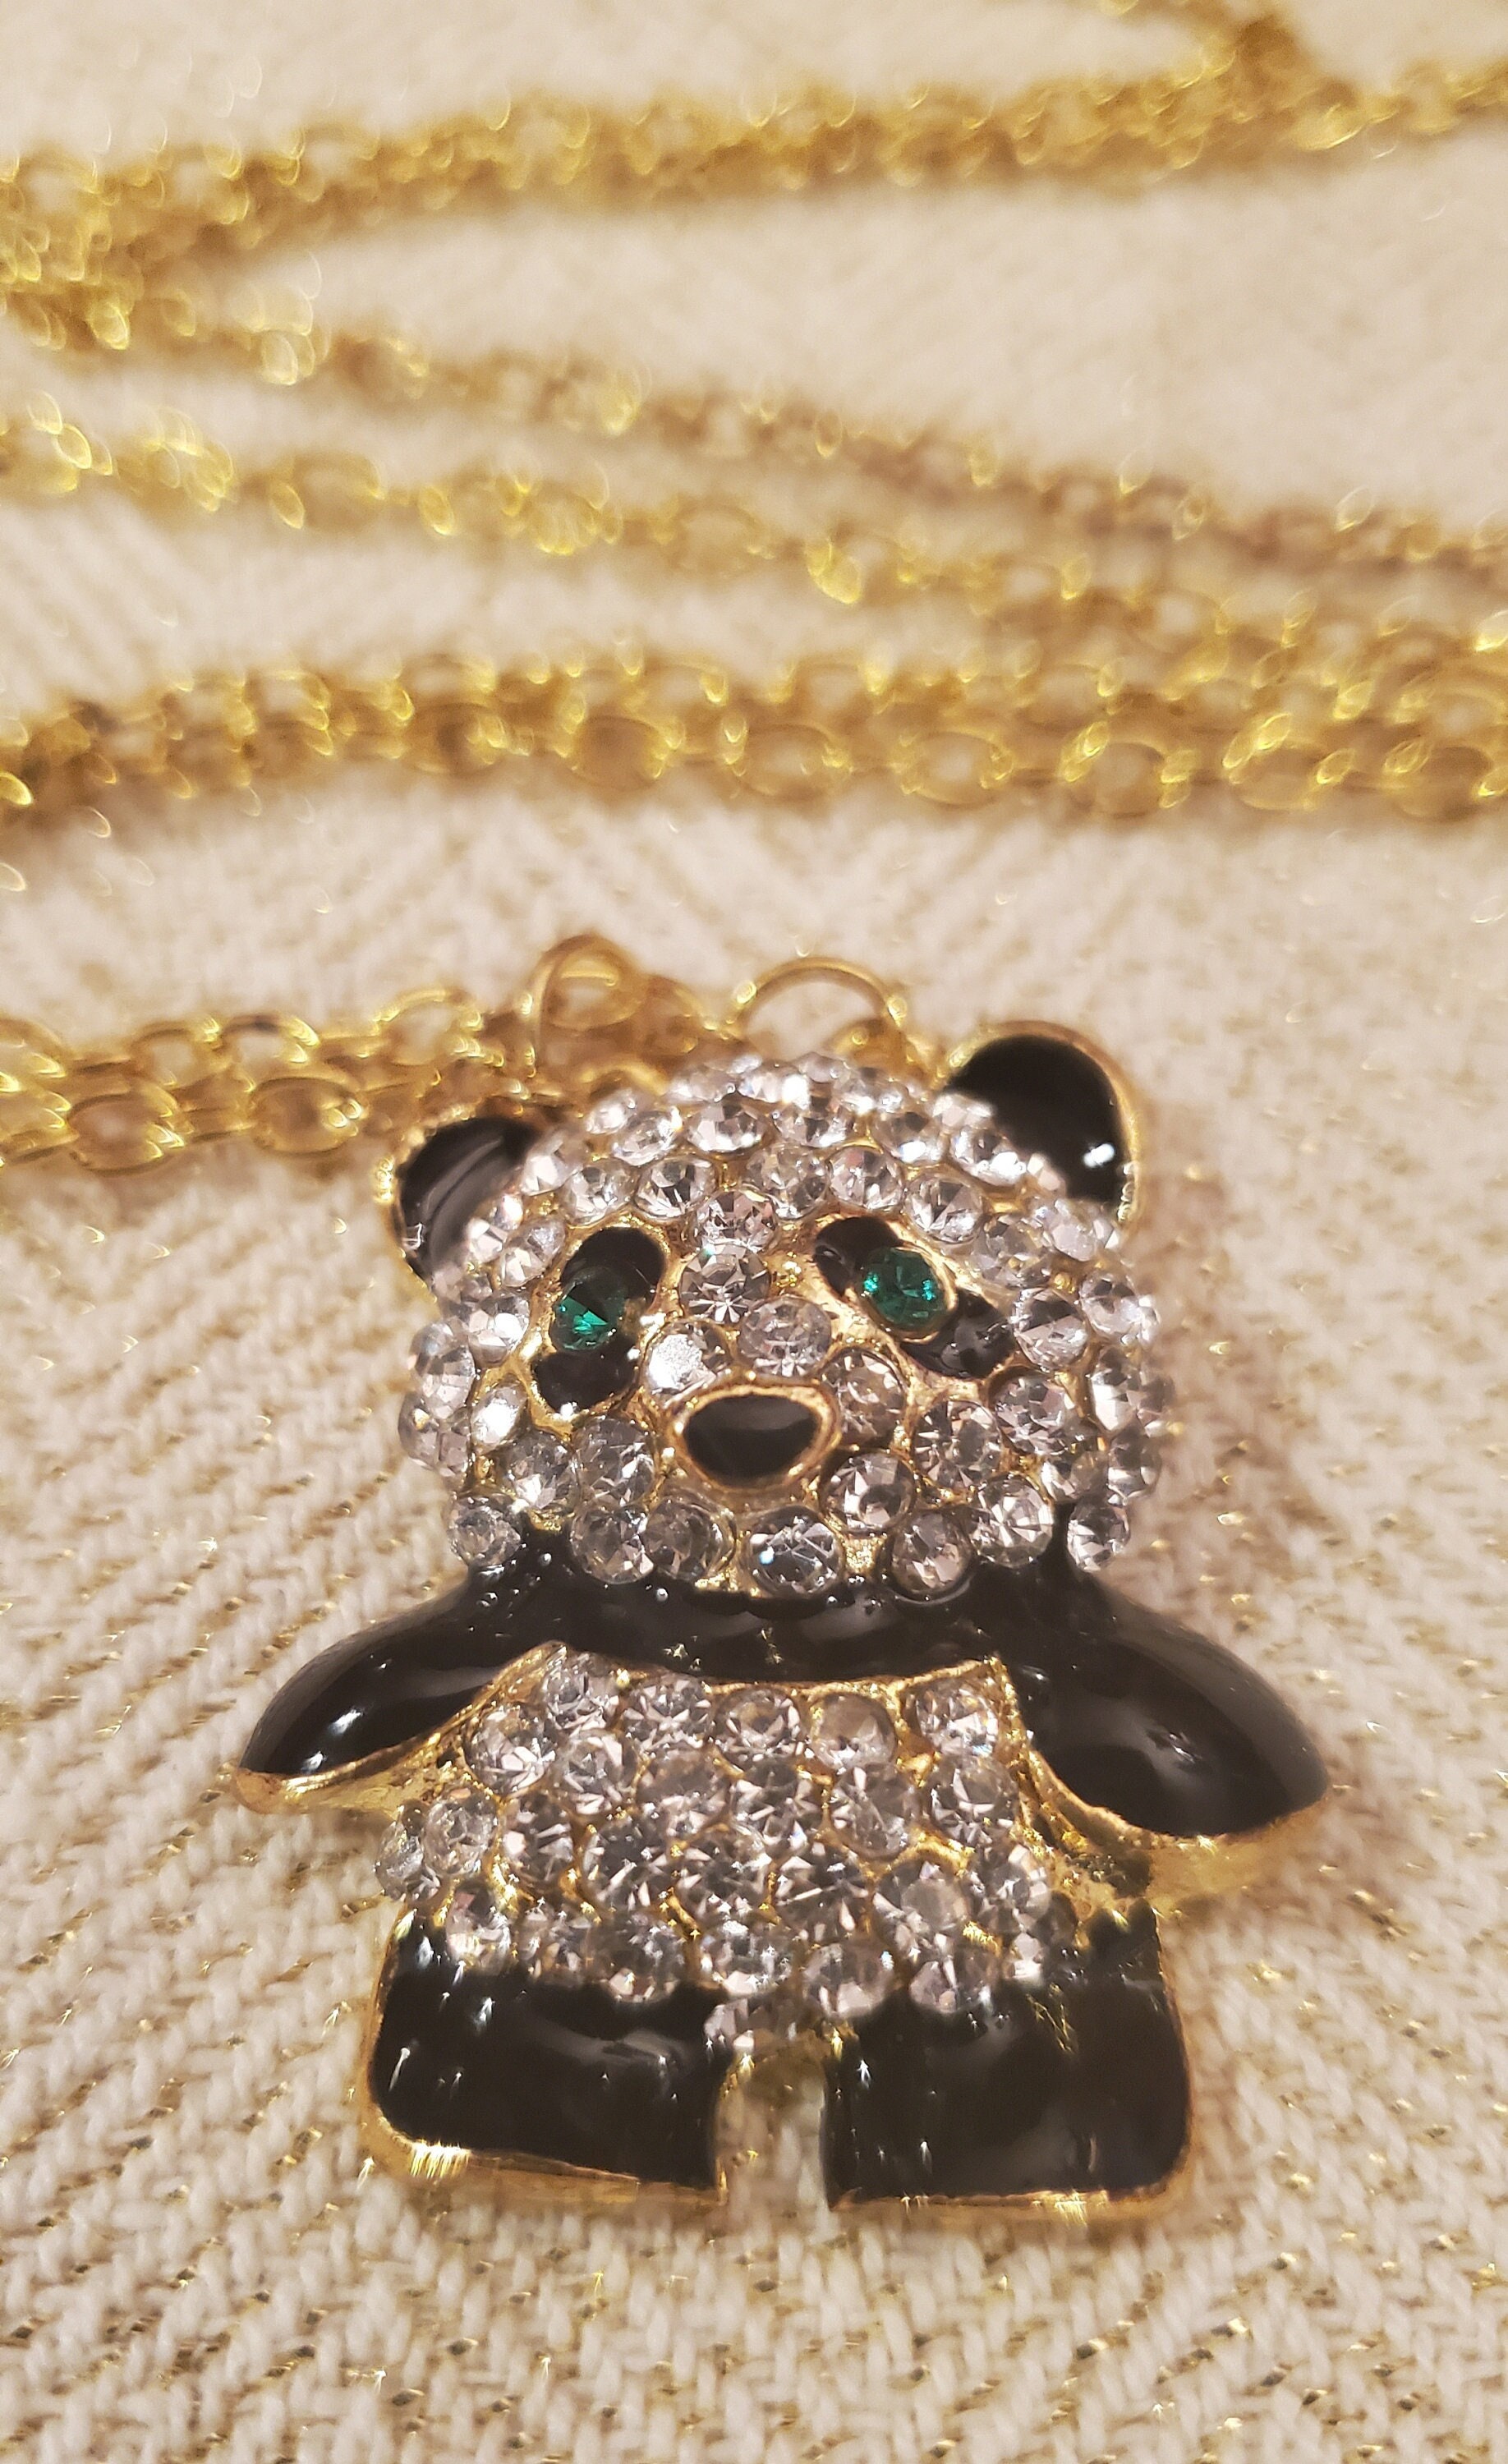 Panda Gold Necklace - Womens Chain Necklace 18K